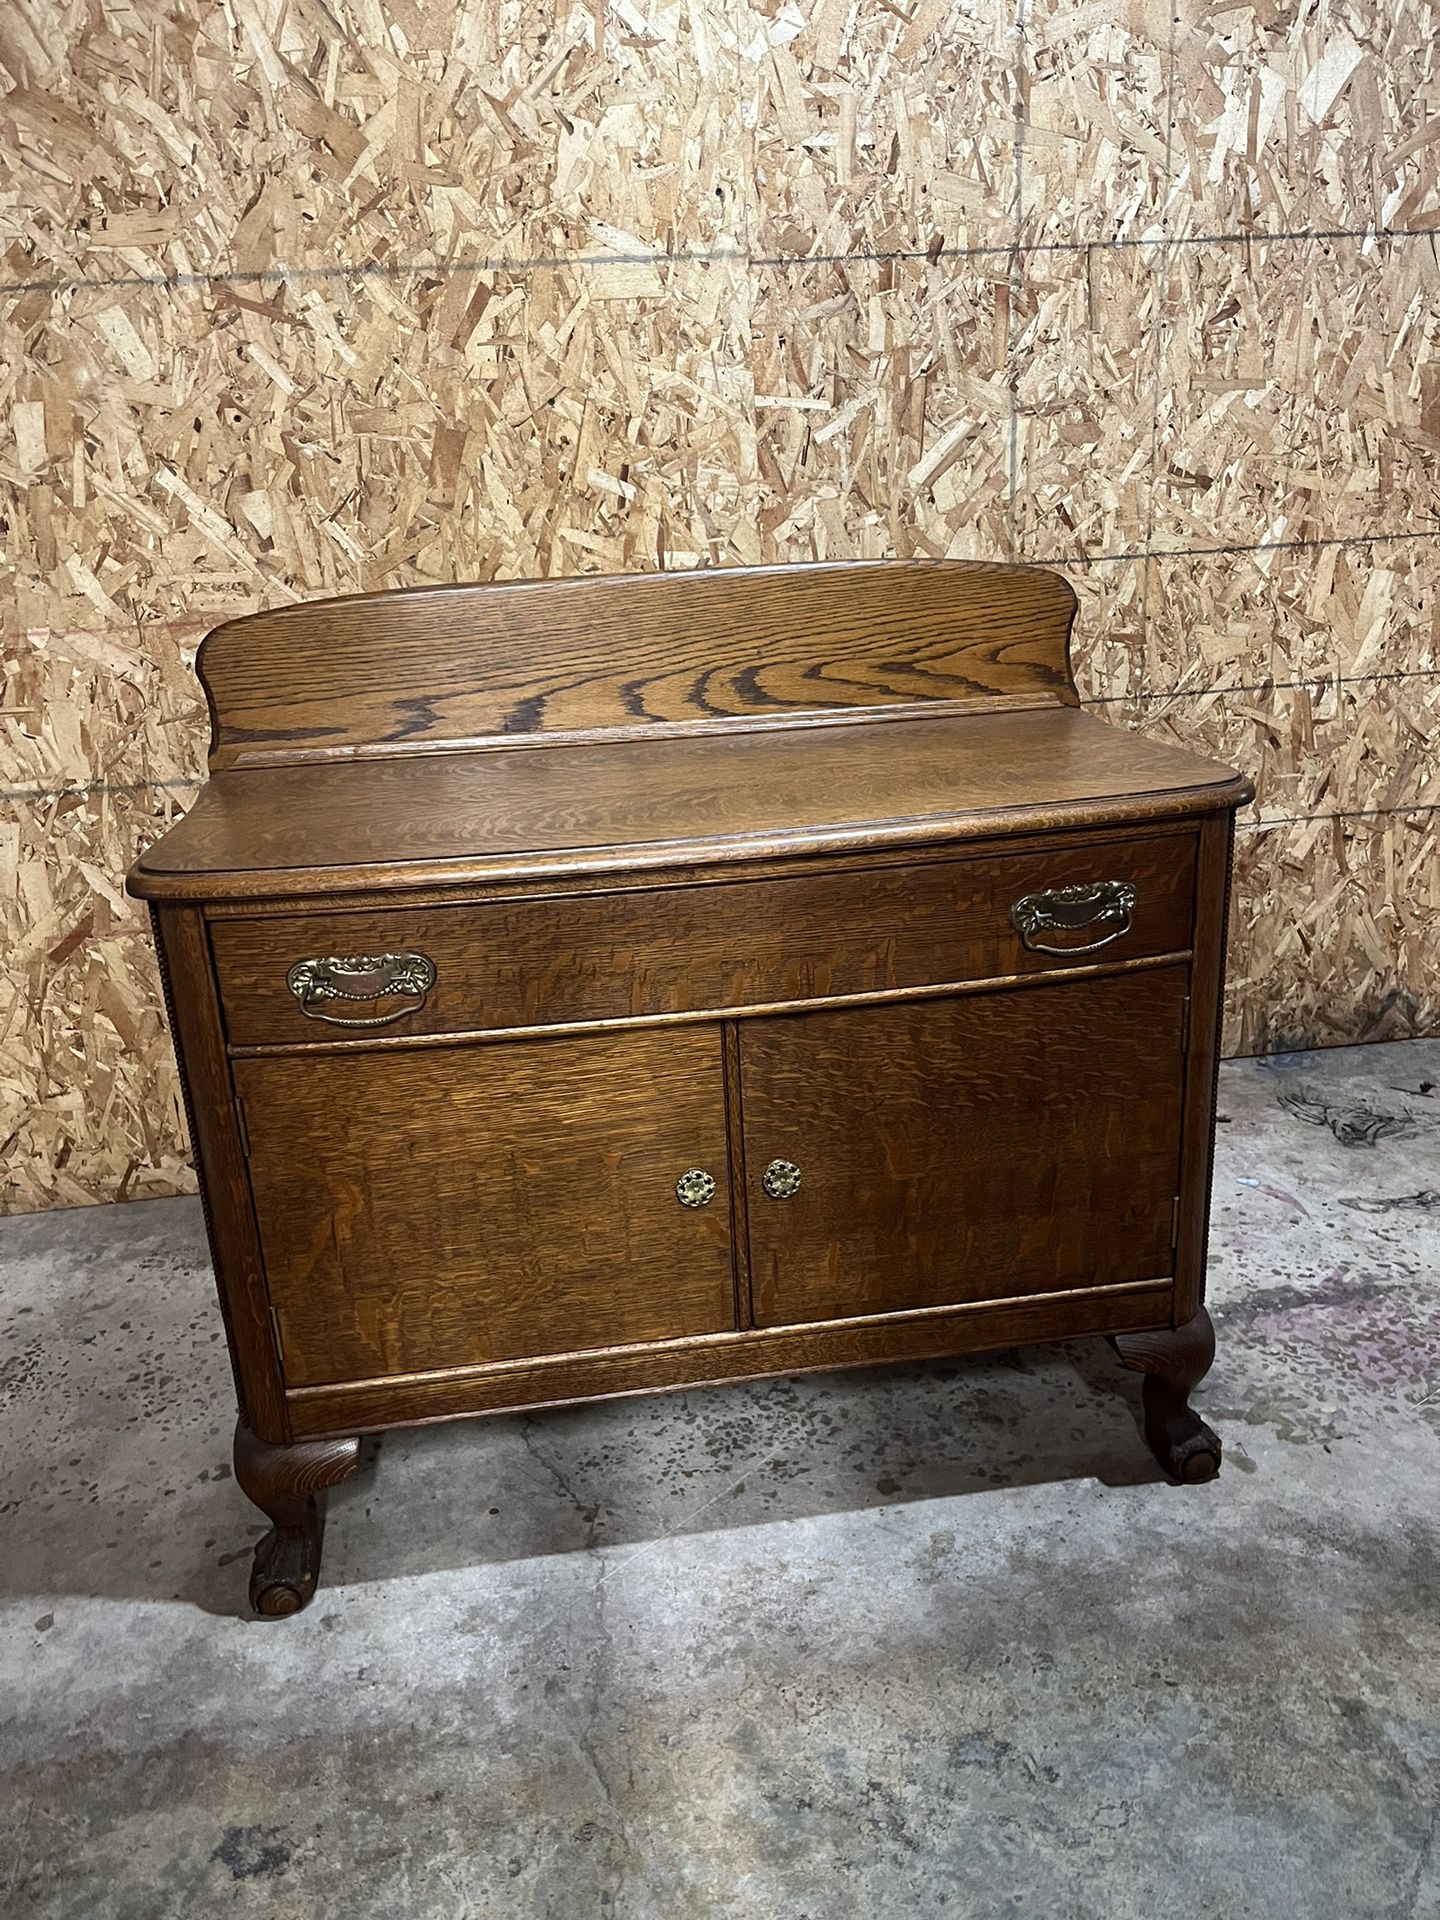 Antique Commode/Sideboard Cabinet